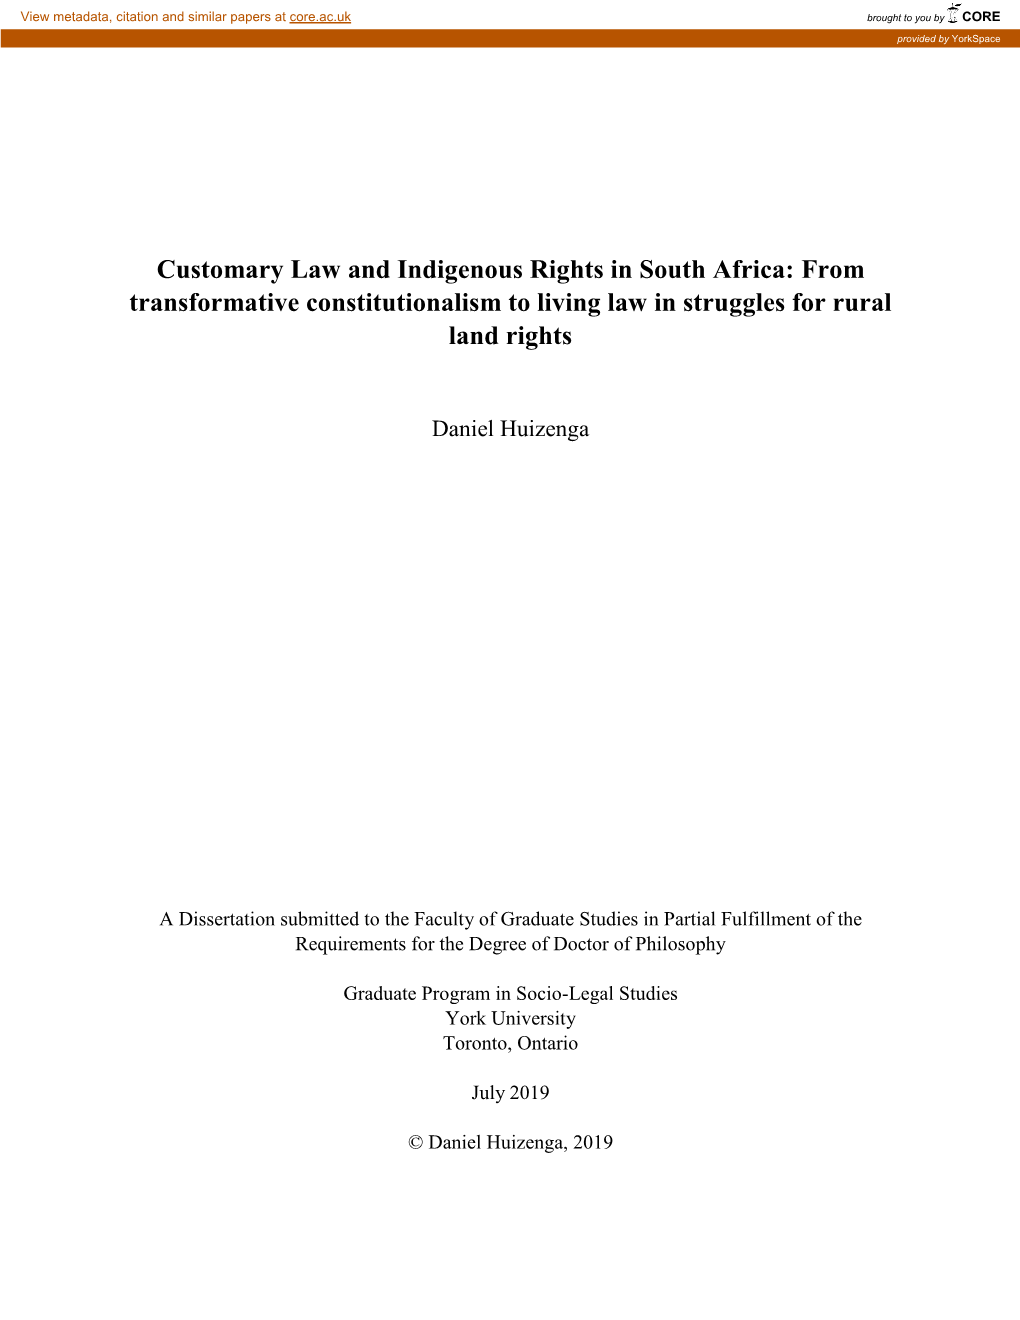 Customary Law and Indigenous Rights in South Africa: from Transformative Constitutionalism to Living Law in Struggles for Rural Land Rights